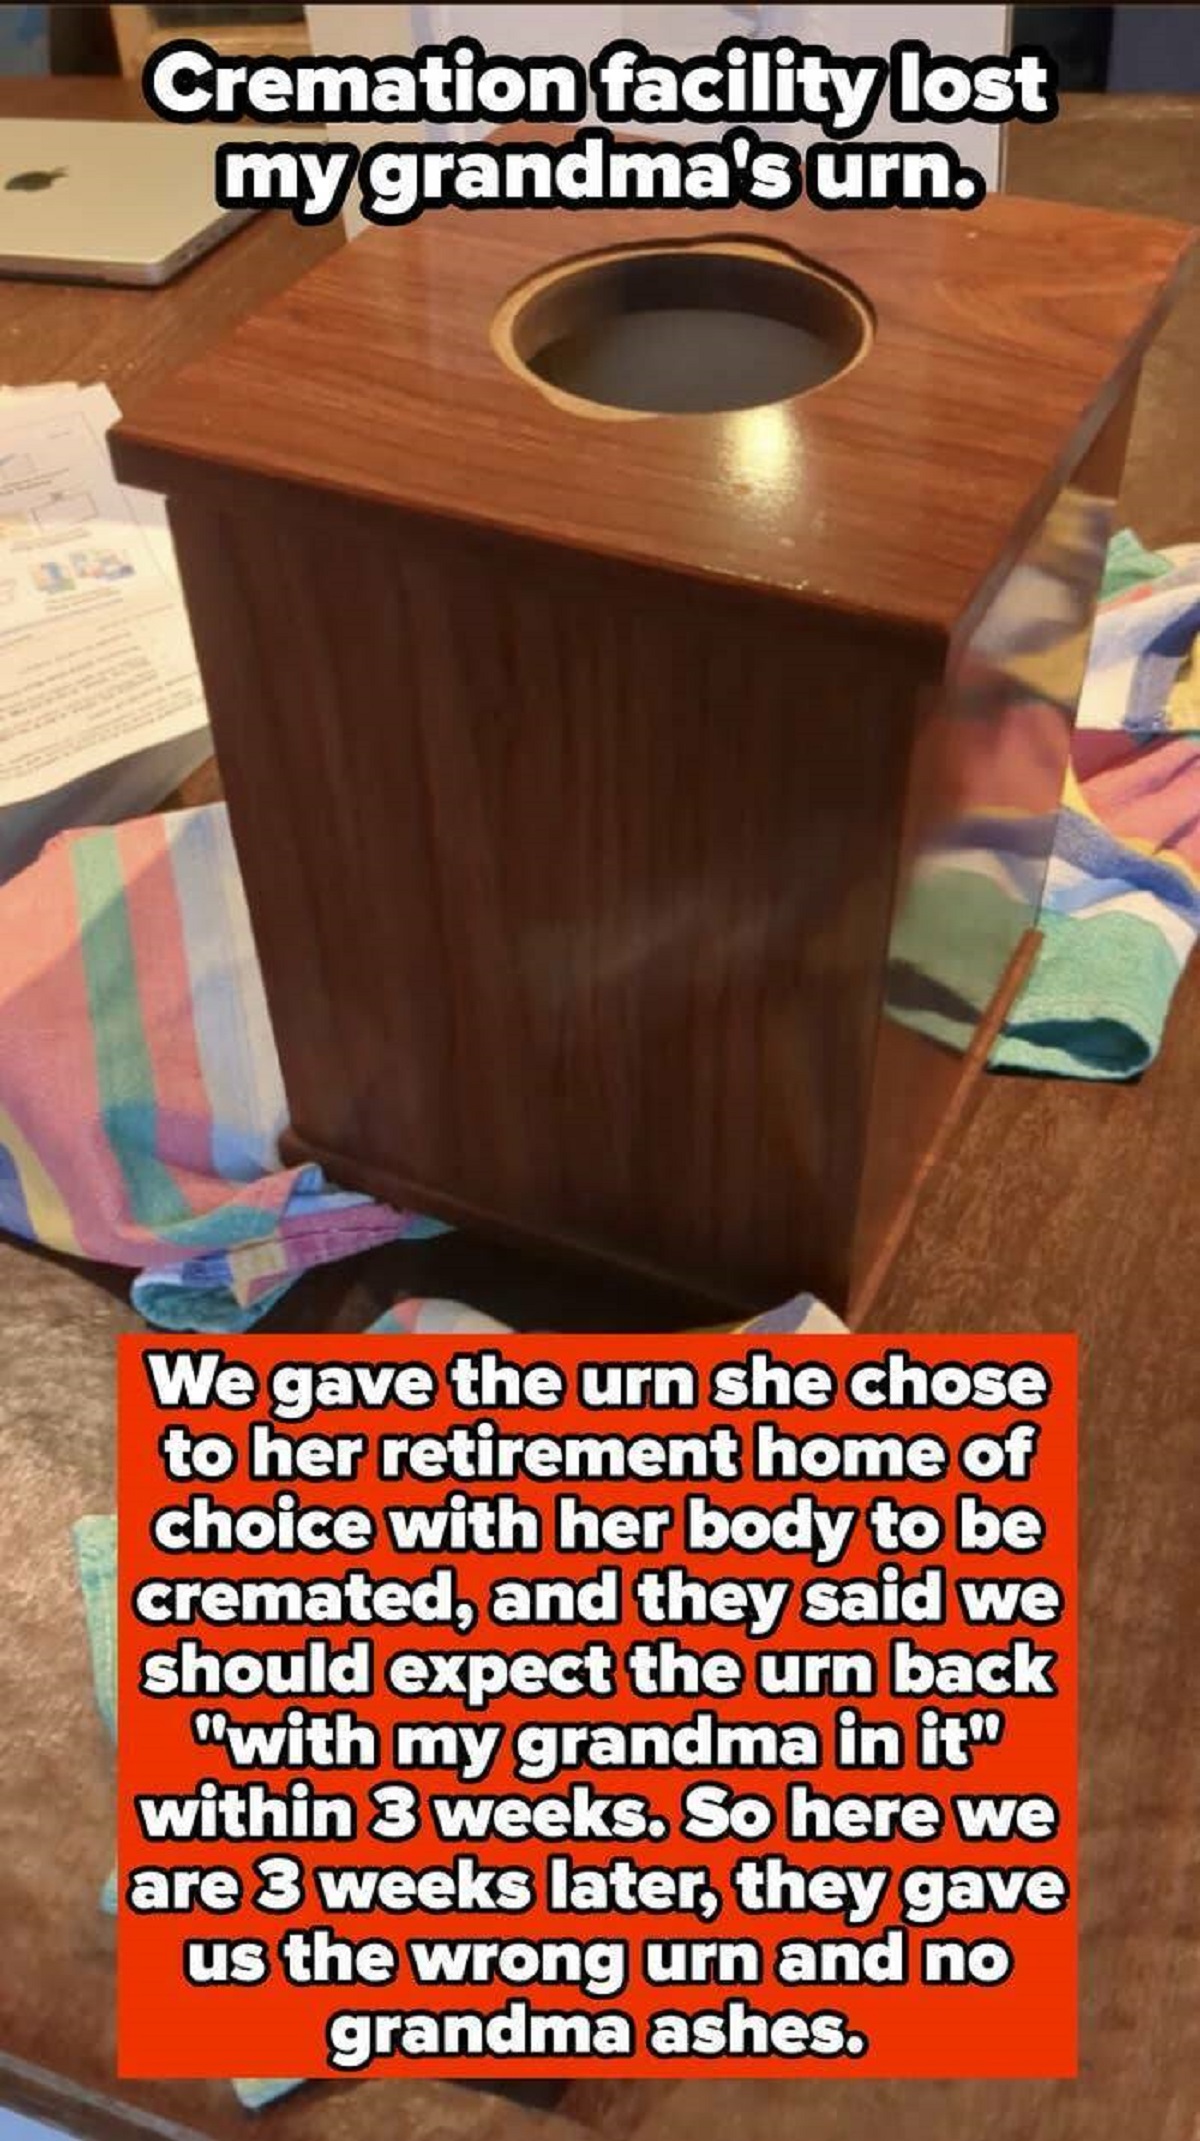 plywood - Cremation facility lost my grandma's urn. We gave the urn she chose to her retirement home of choice with her body to be cremated, and they said we should expect the urn back "with my grandma in it" within 3 weeks. So here we are 3 weeks later, 